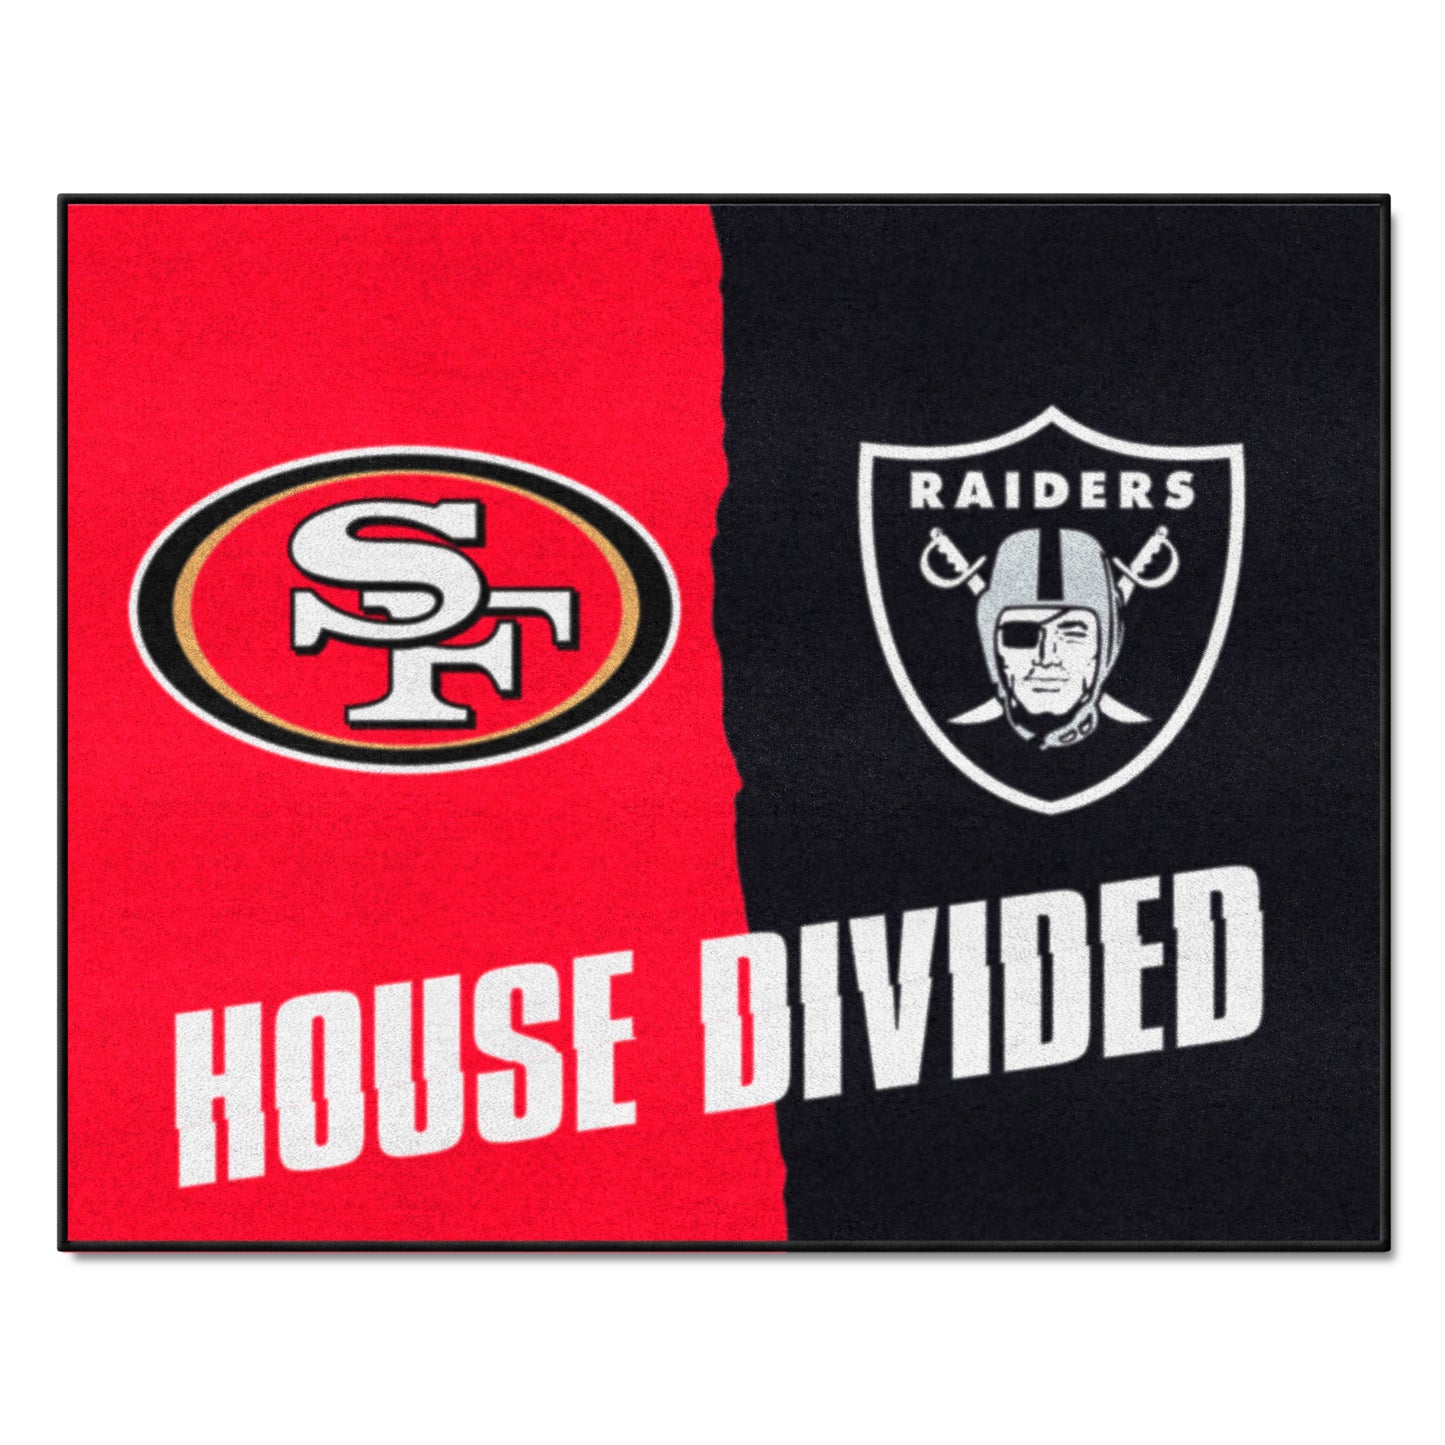 NFL 49ers / Raiders House Divided Rug